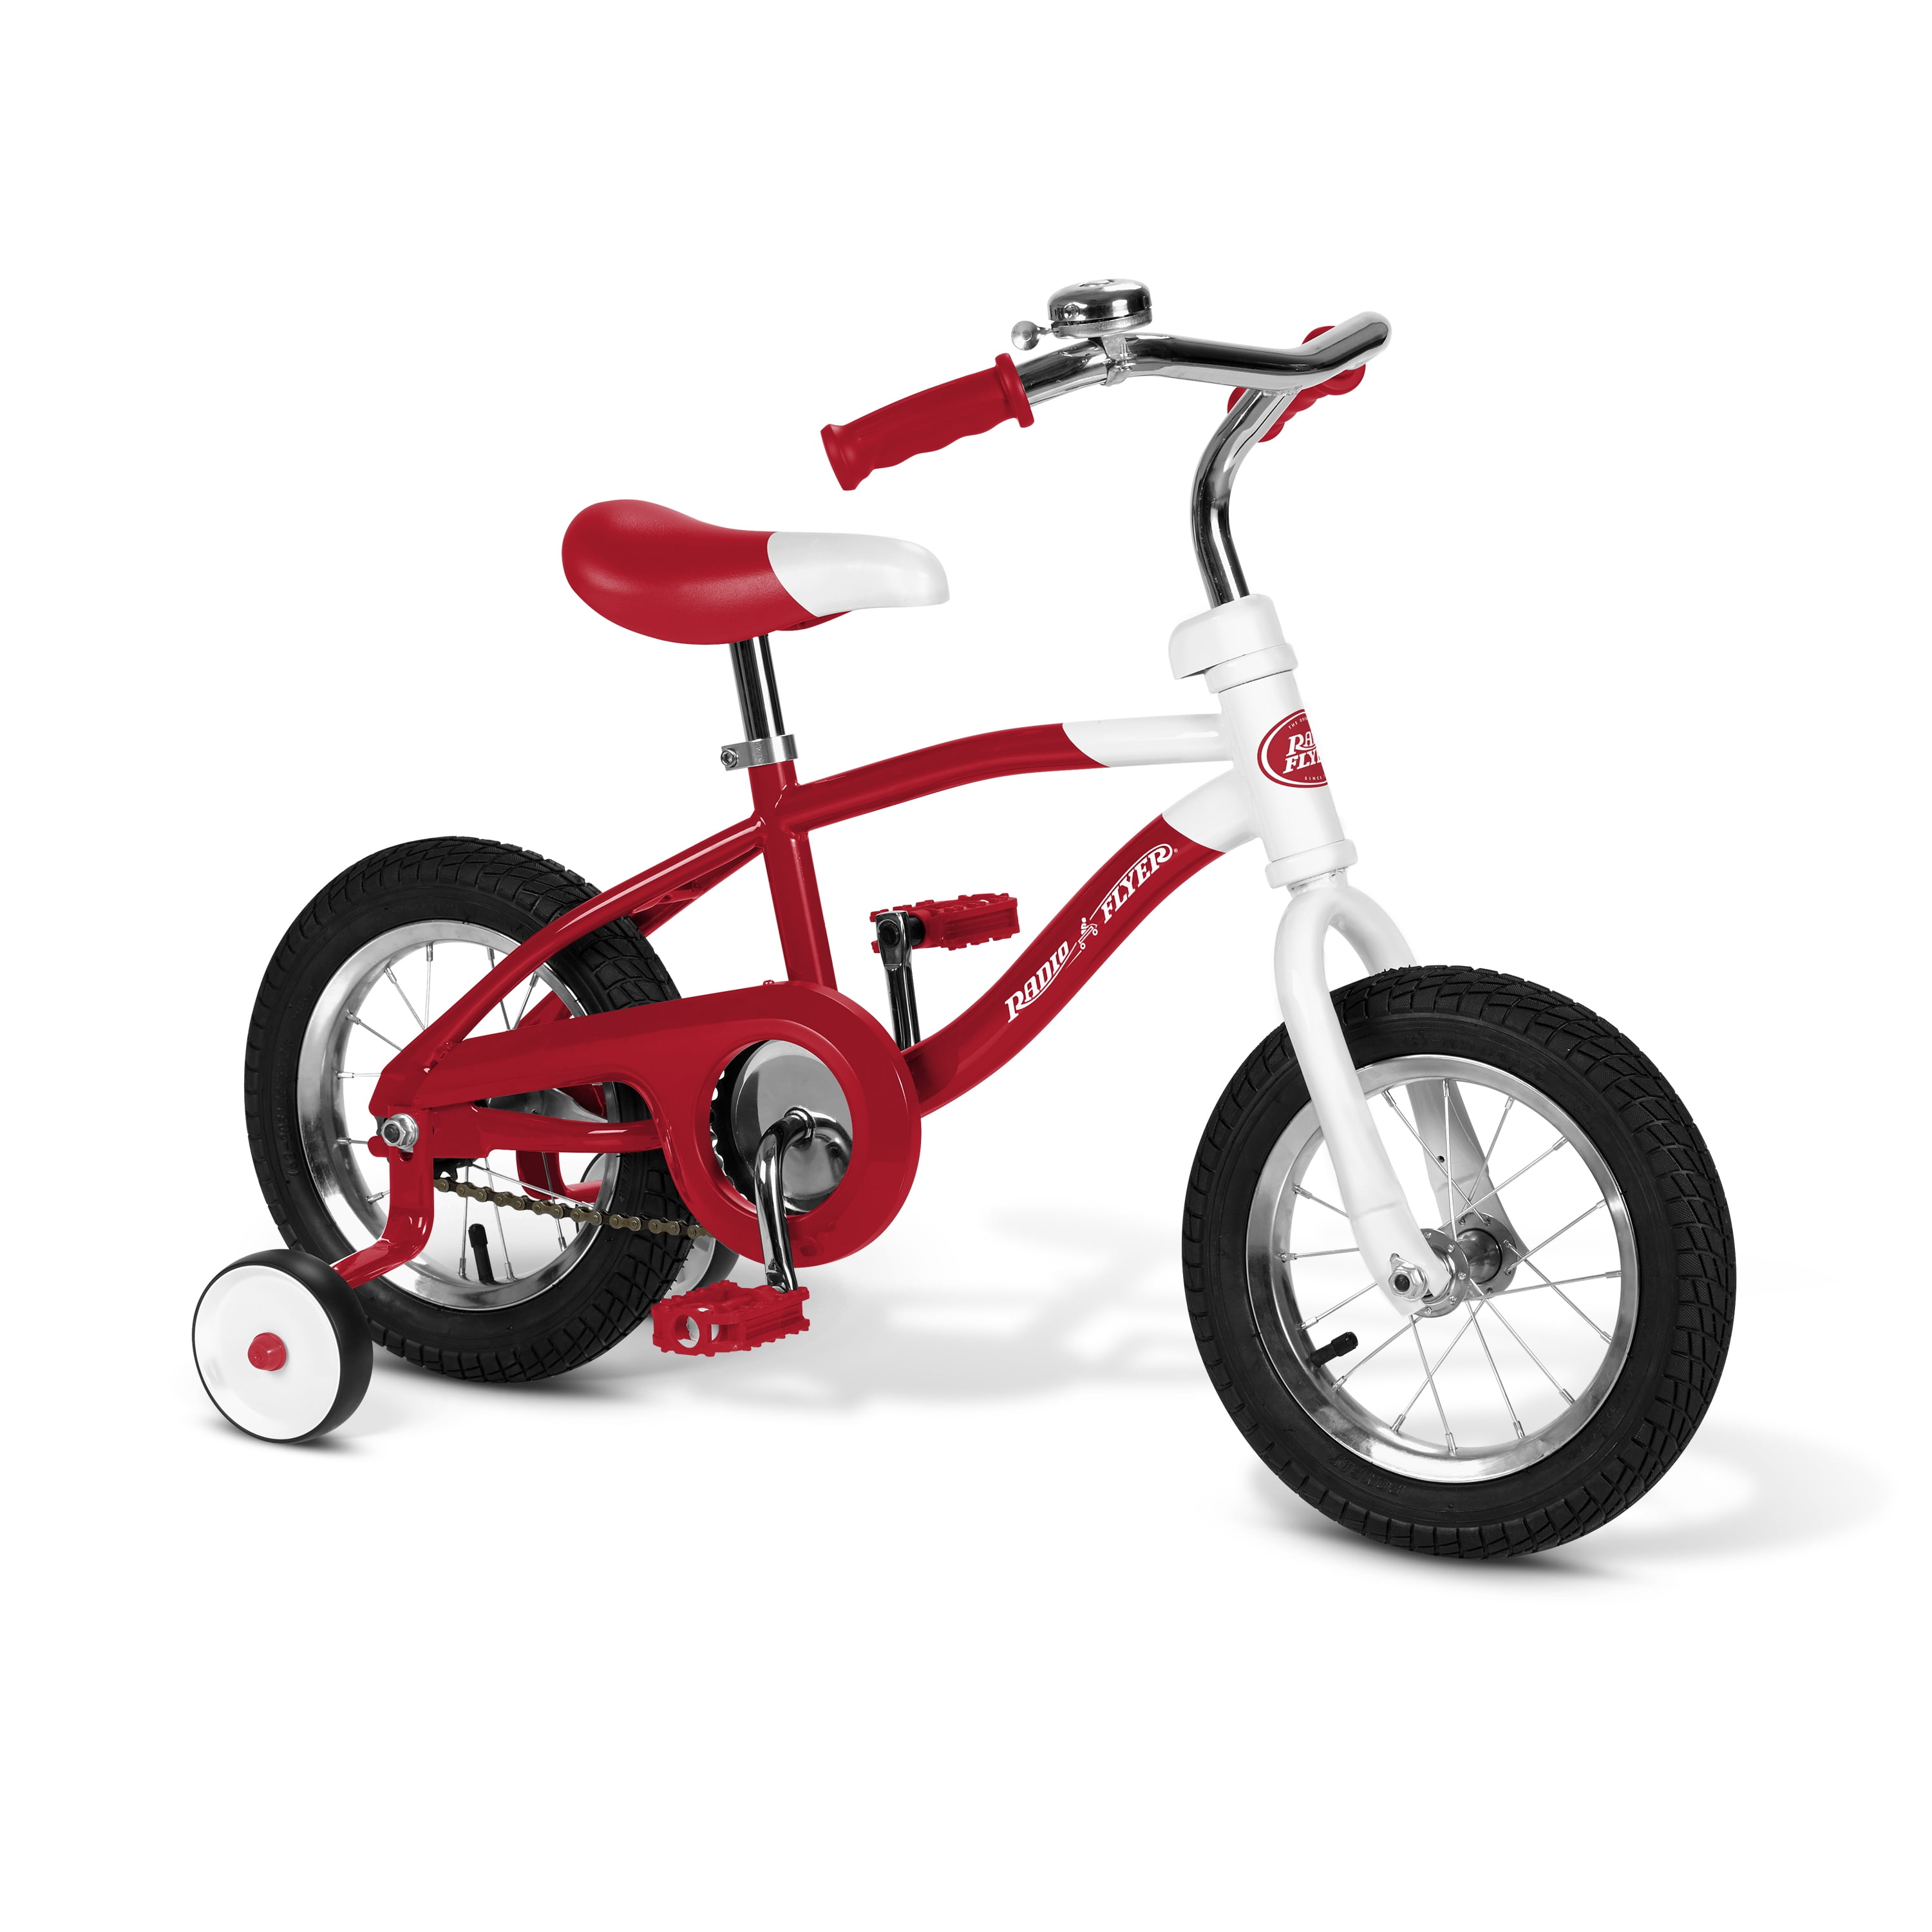 radio flyer bicycle with training wheels